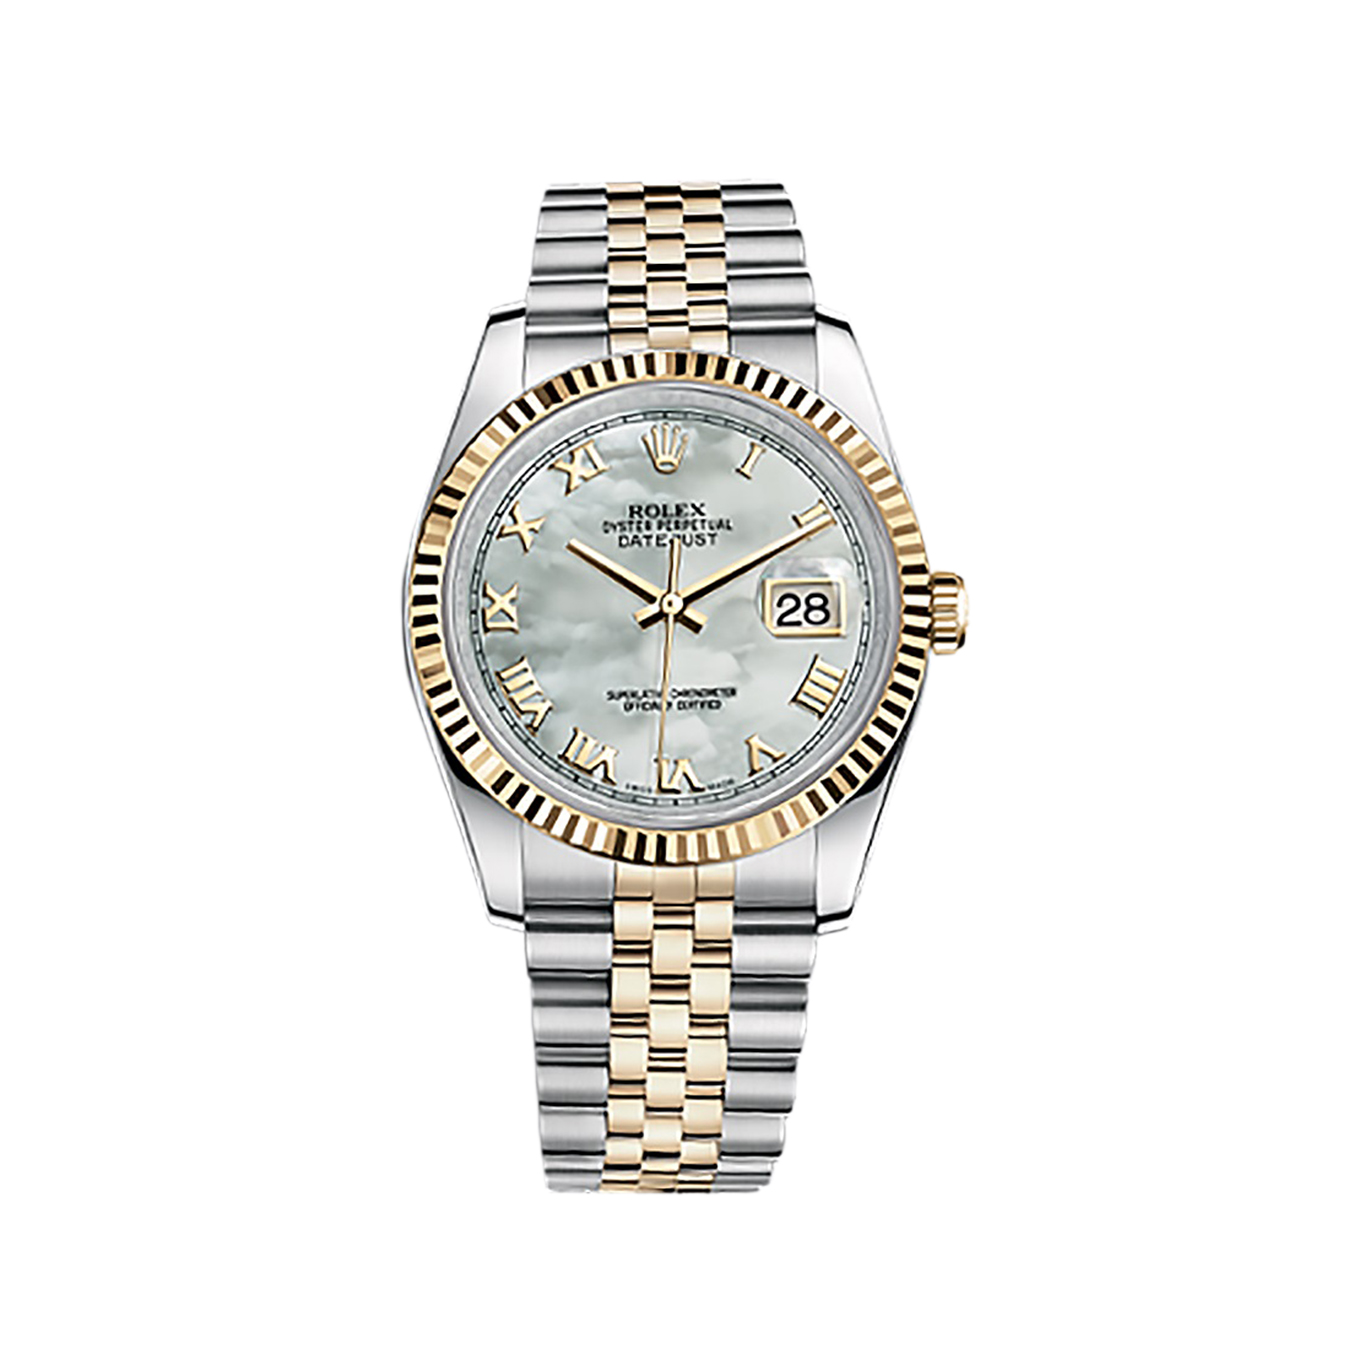 Datejust 36 116233 Gold & Stainless Steel Watch (White Mother-of-Pearl)